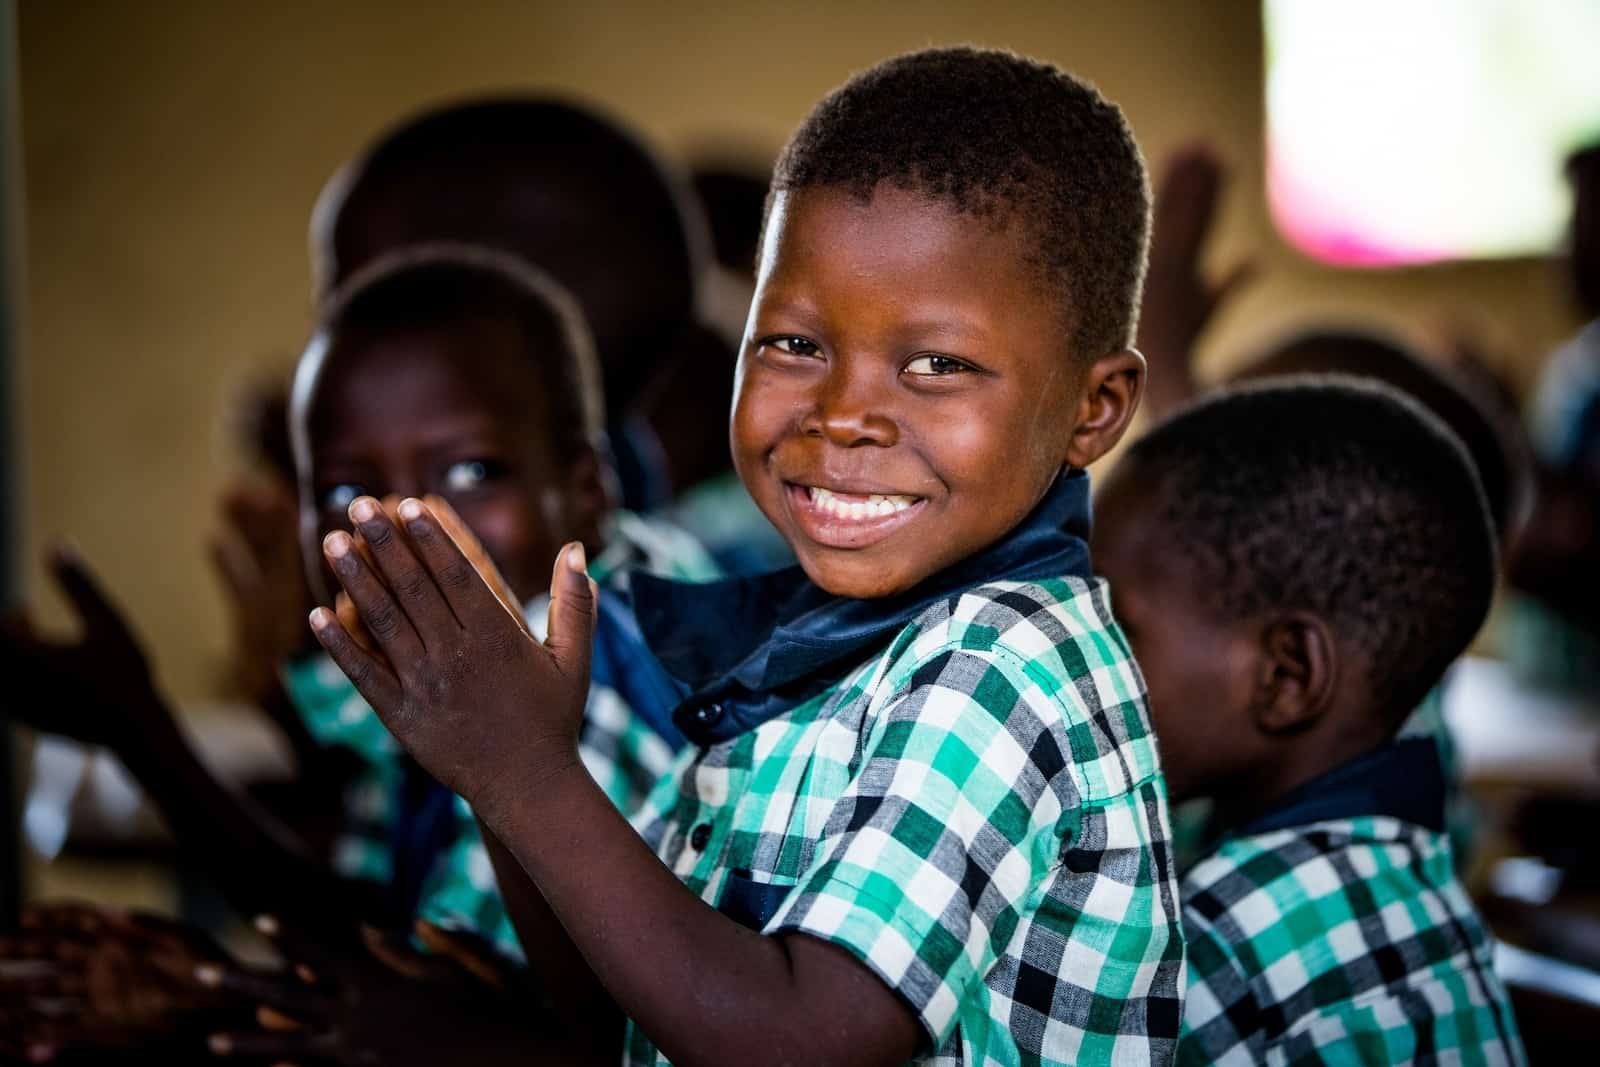 A boy in Burkina Faso wearing a green and blue checked shirt holds his hands together in praying while smiling at the camera. He is in a classroom surrounded by other children praying. 